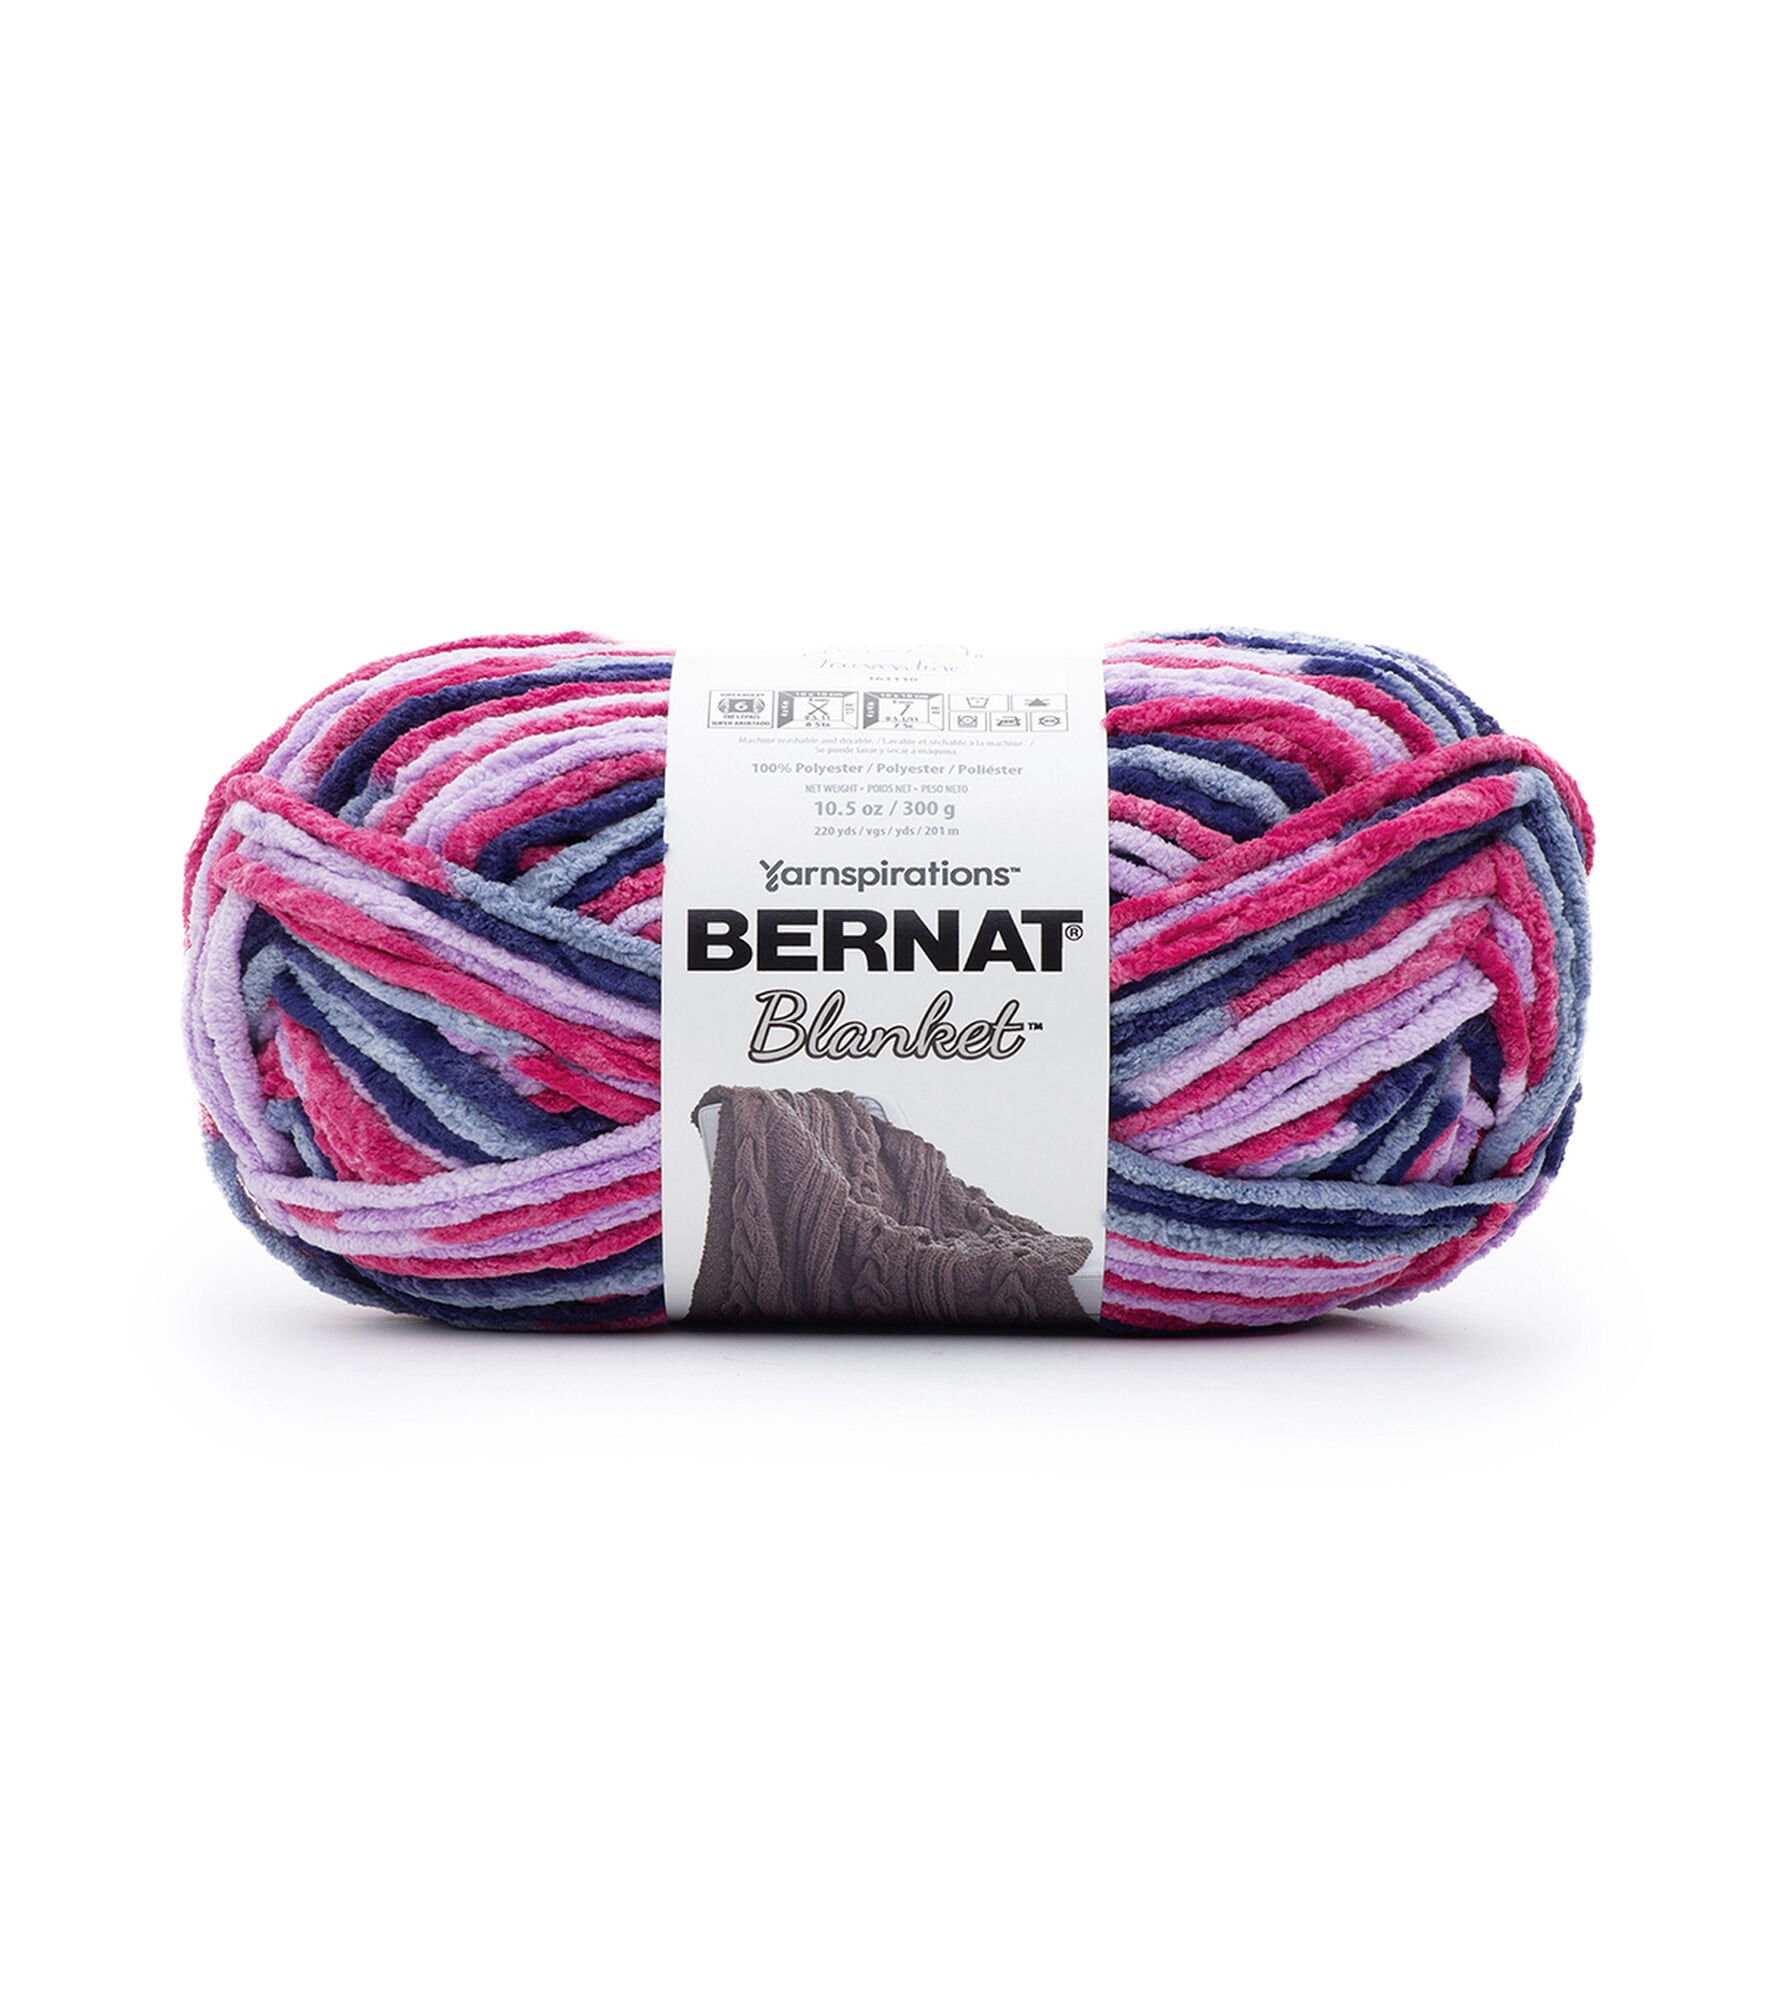 220 Yard Skein of Super Bulky (Size 6) Blanket Yarn – 100% Polyester Fibers  – Multiple Color Options – for Weaving, Knitting, and Crochet (Sonoma)